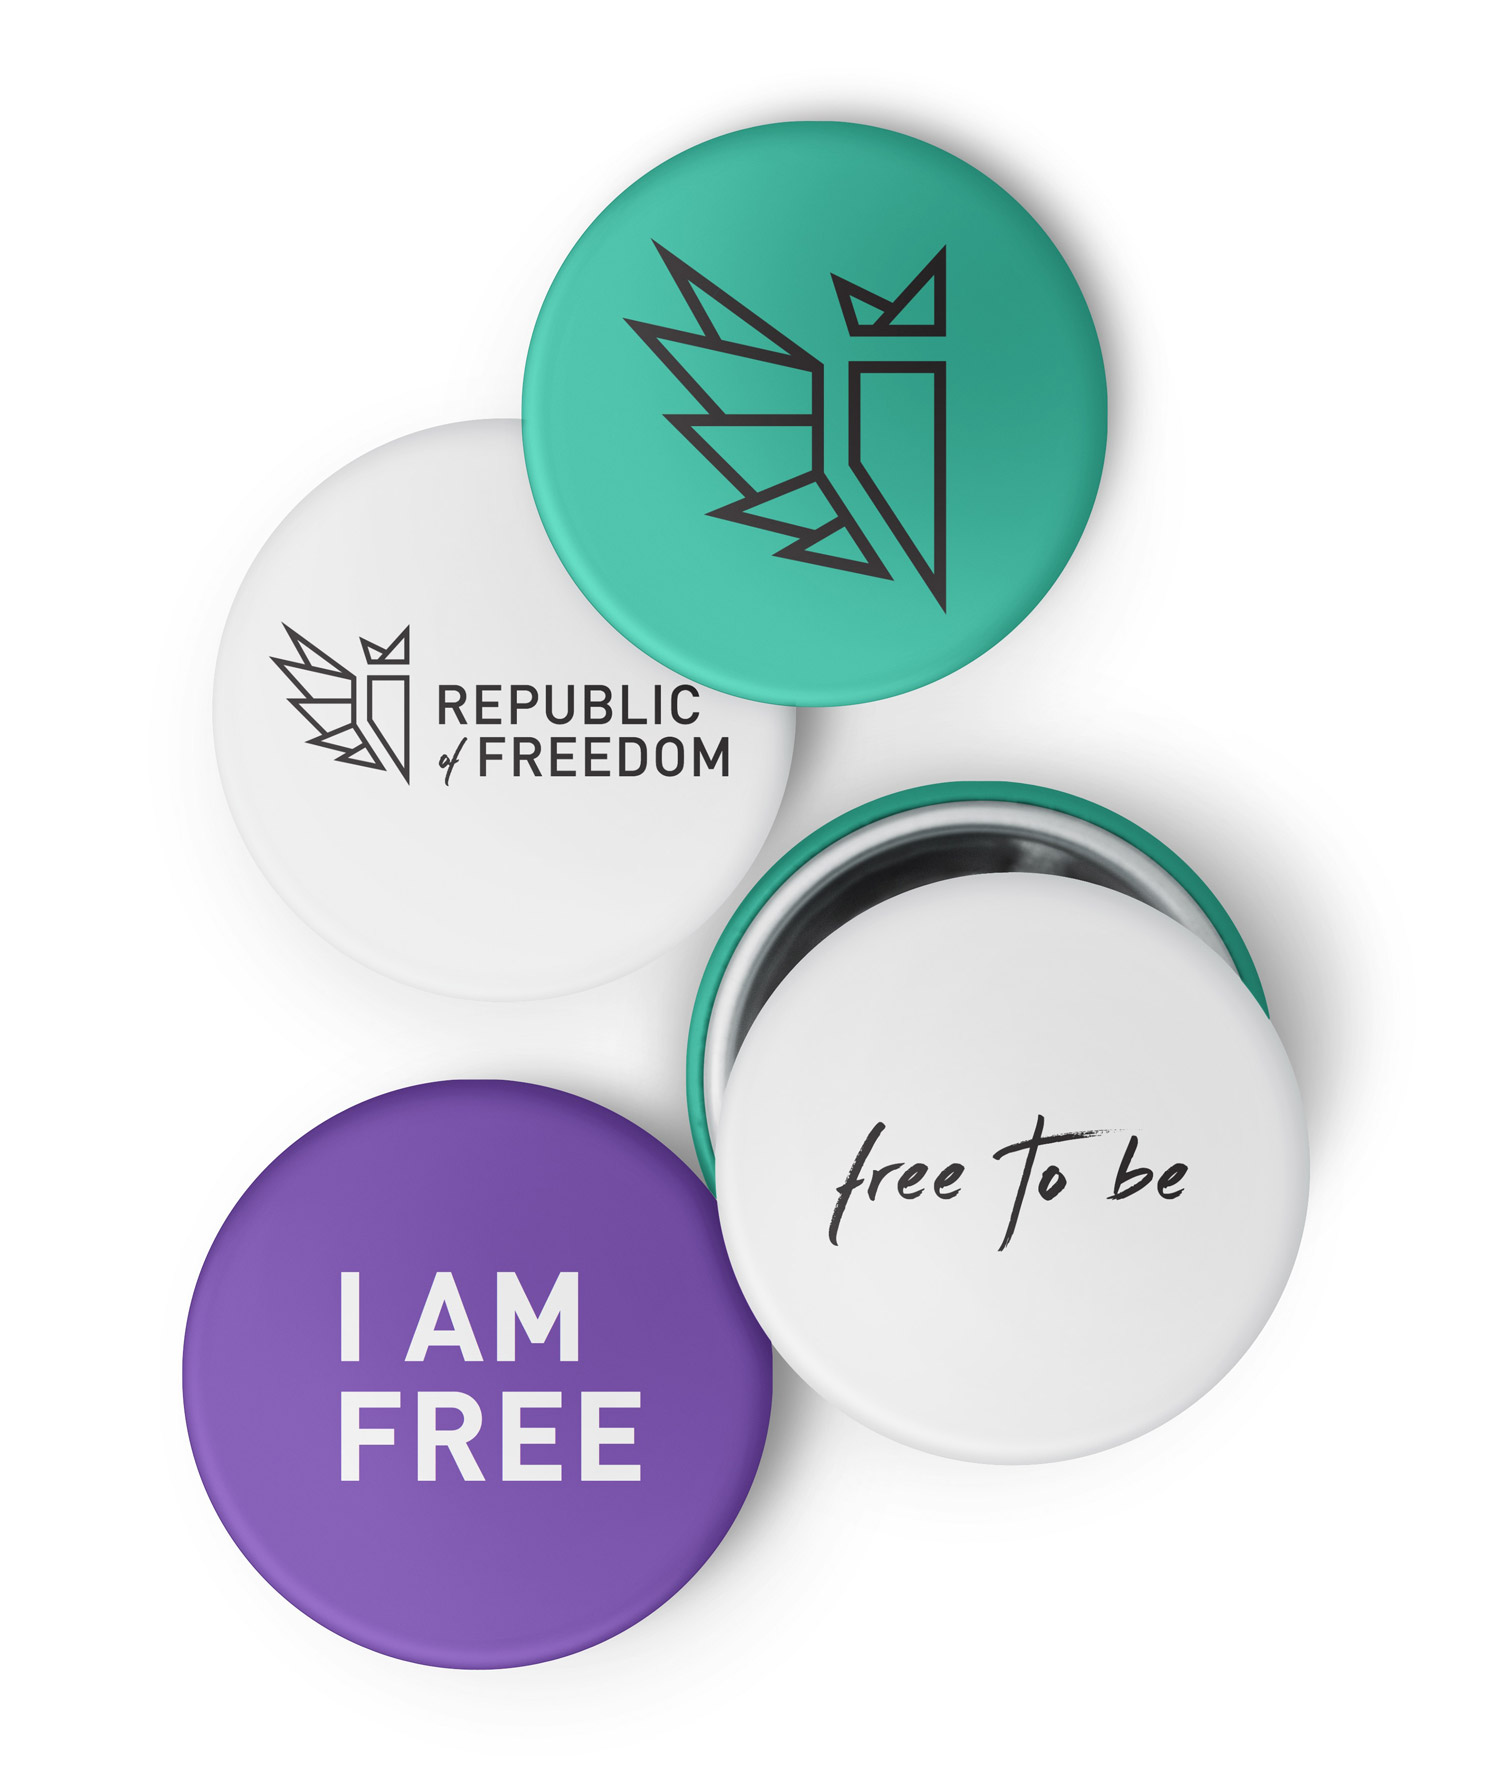 Republic of Freedom buttons // a little creative